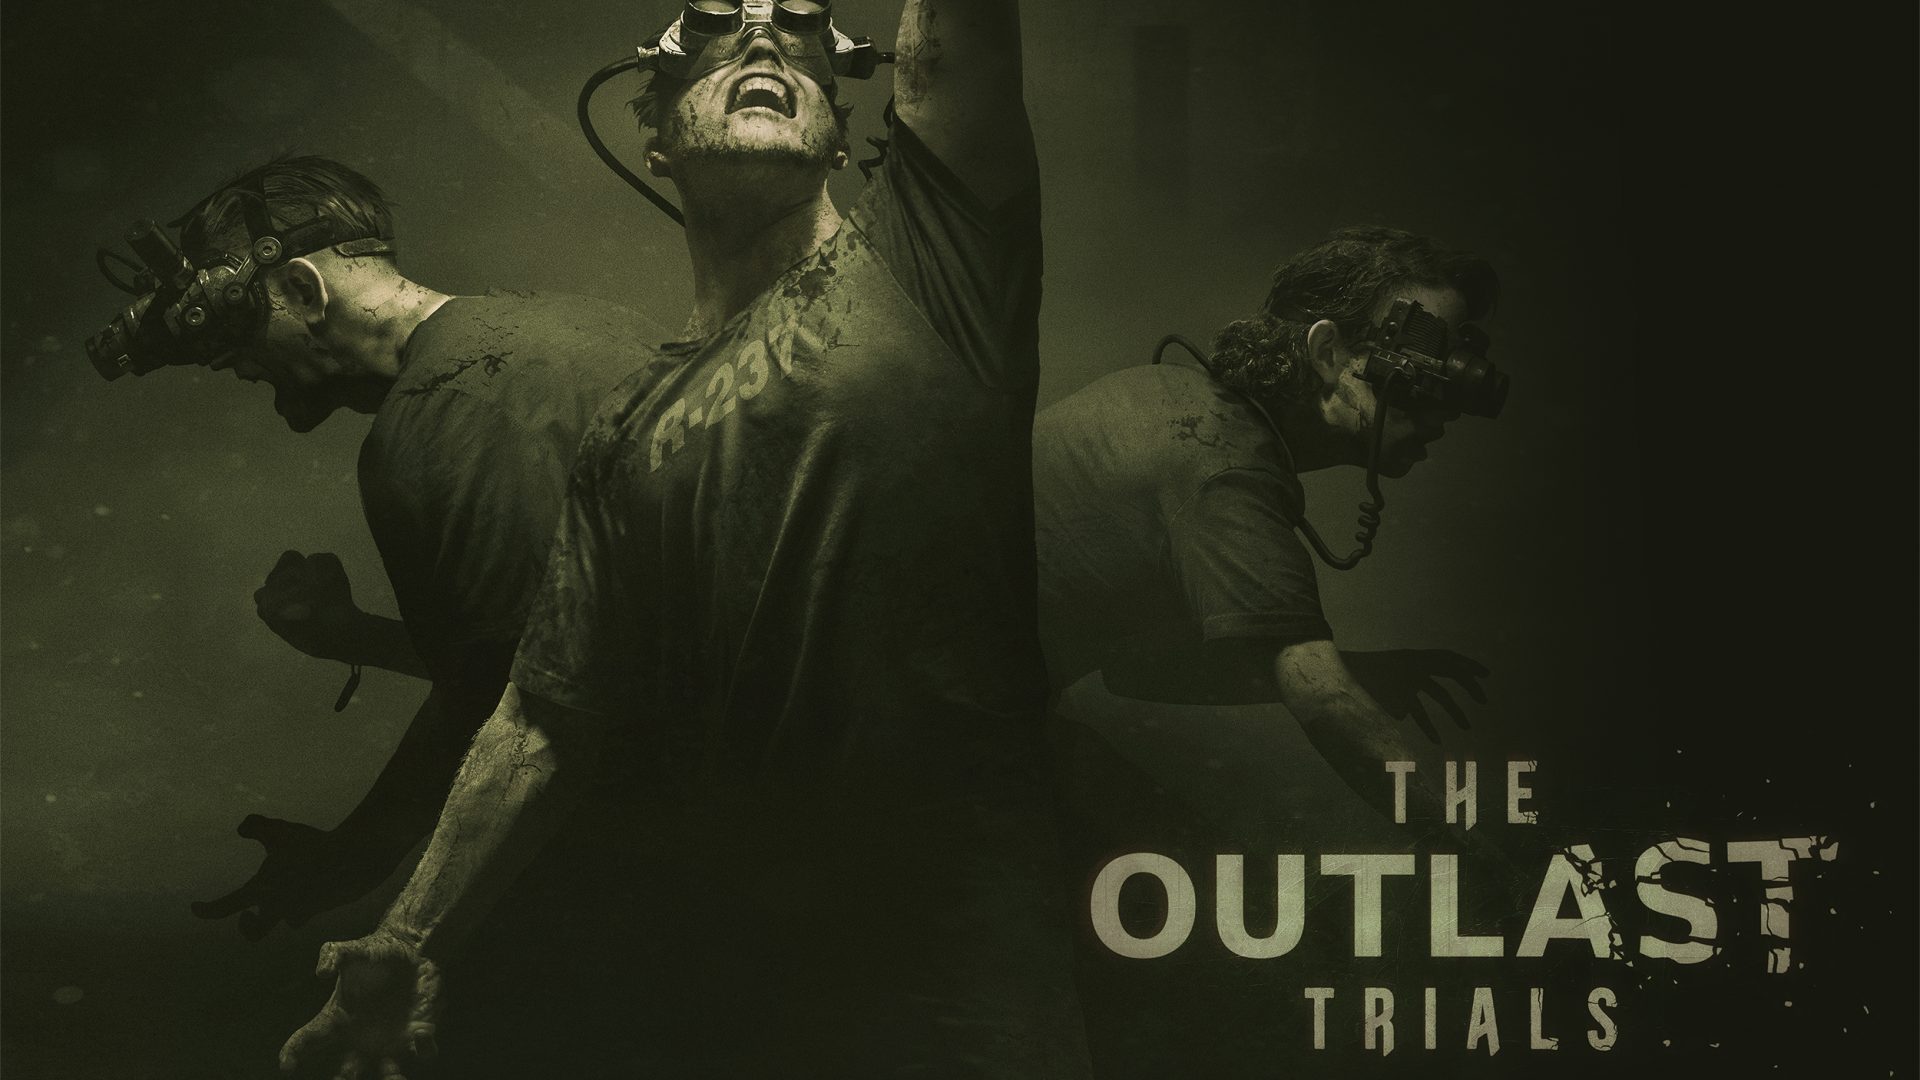 the outlast trials publisher